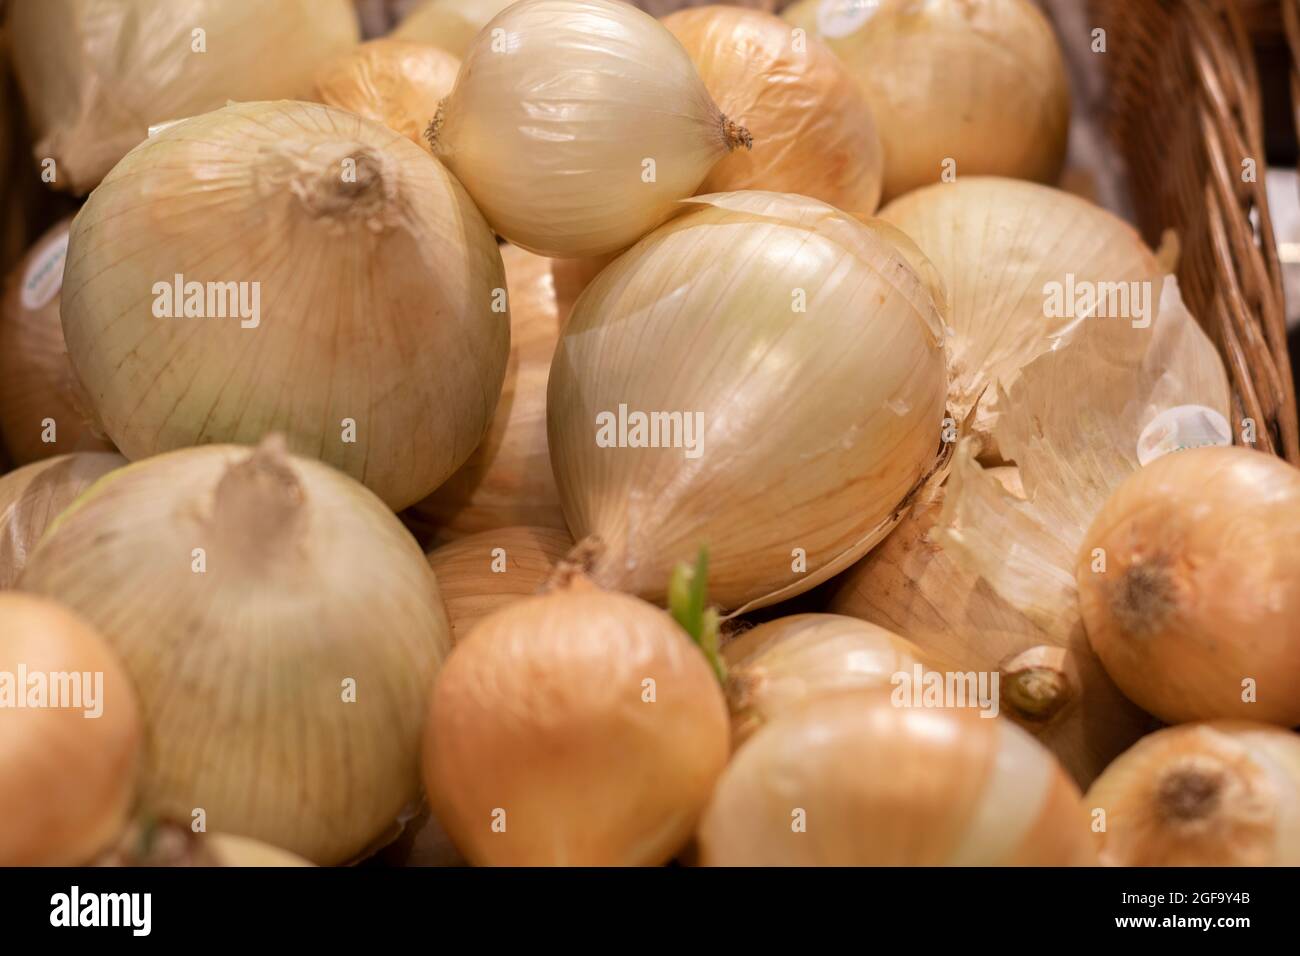 A basket of whole onions, as a background. Stock Photo